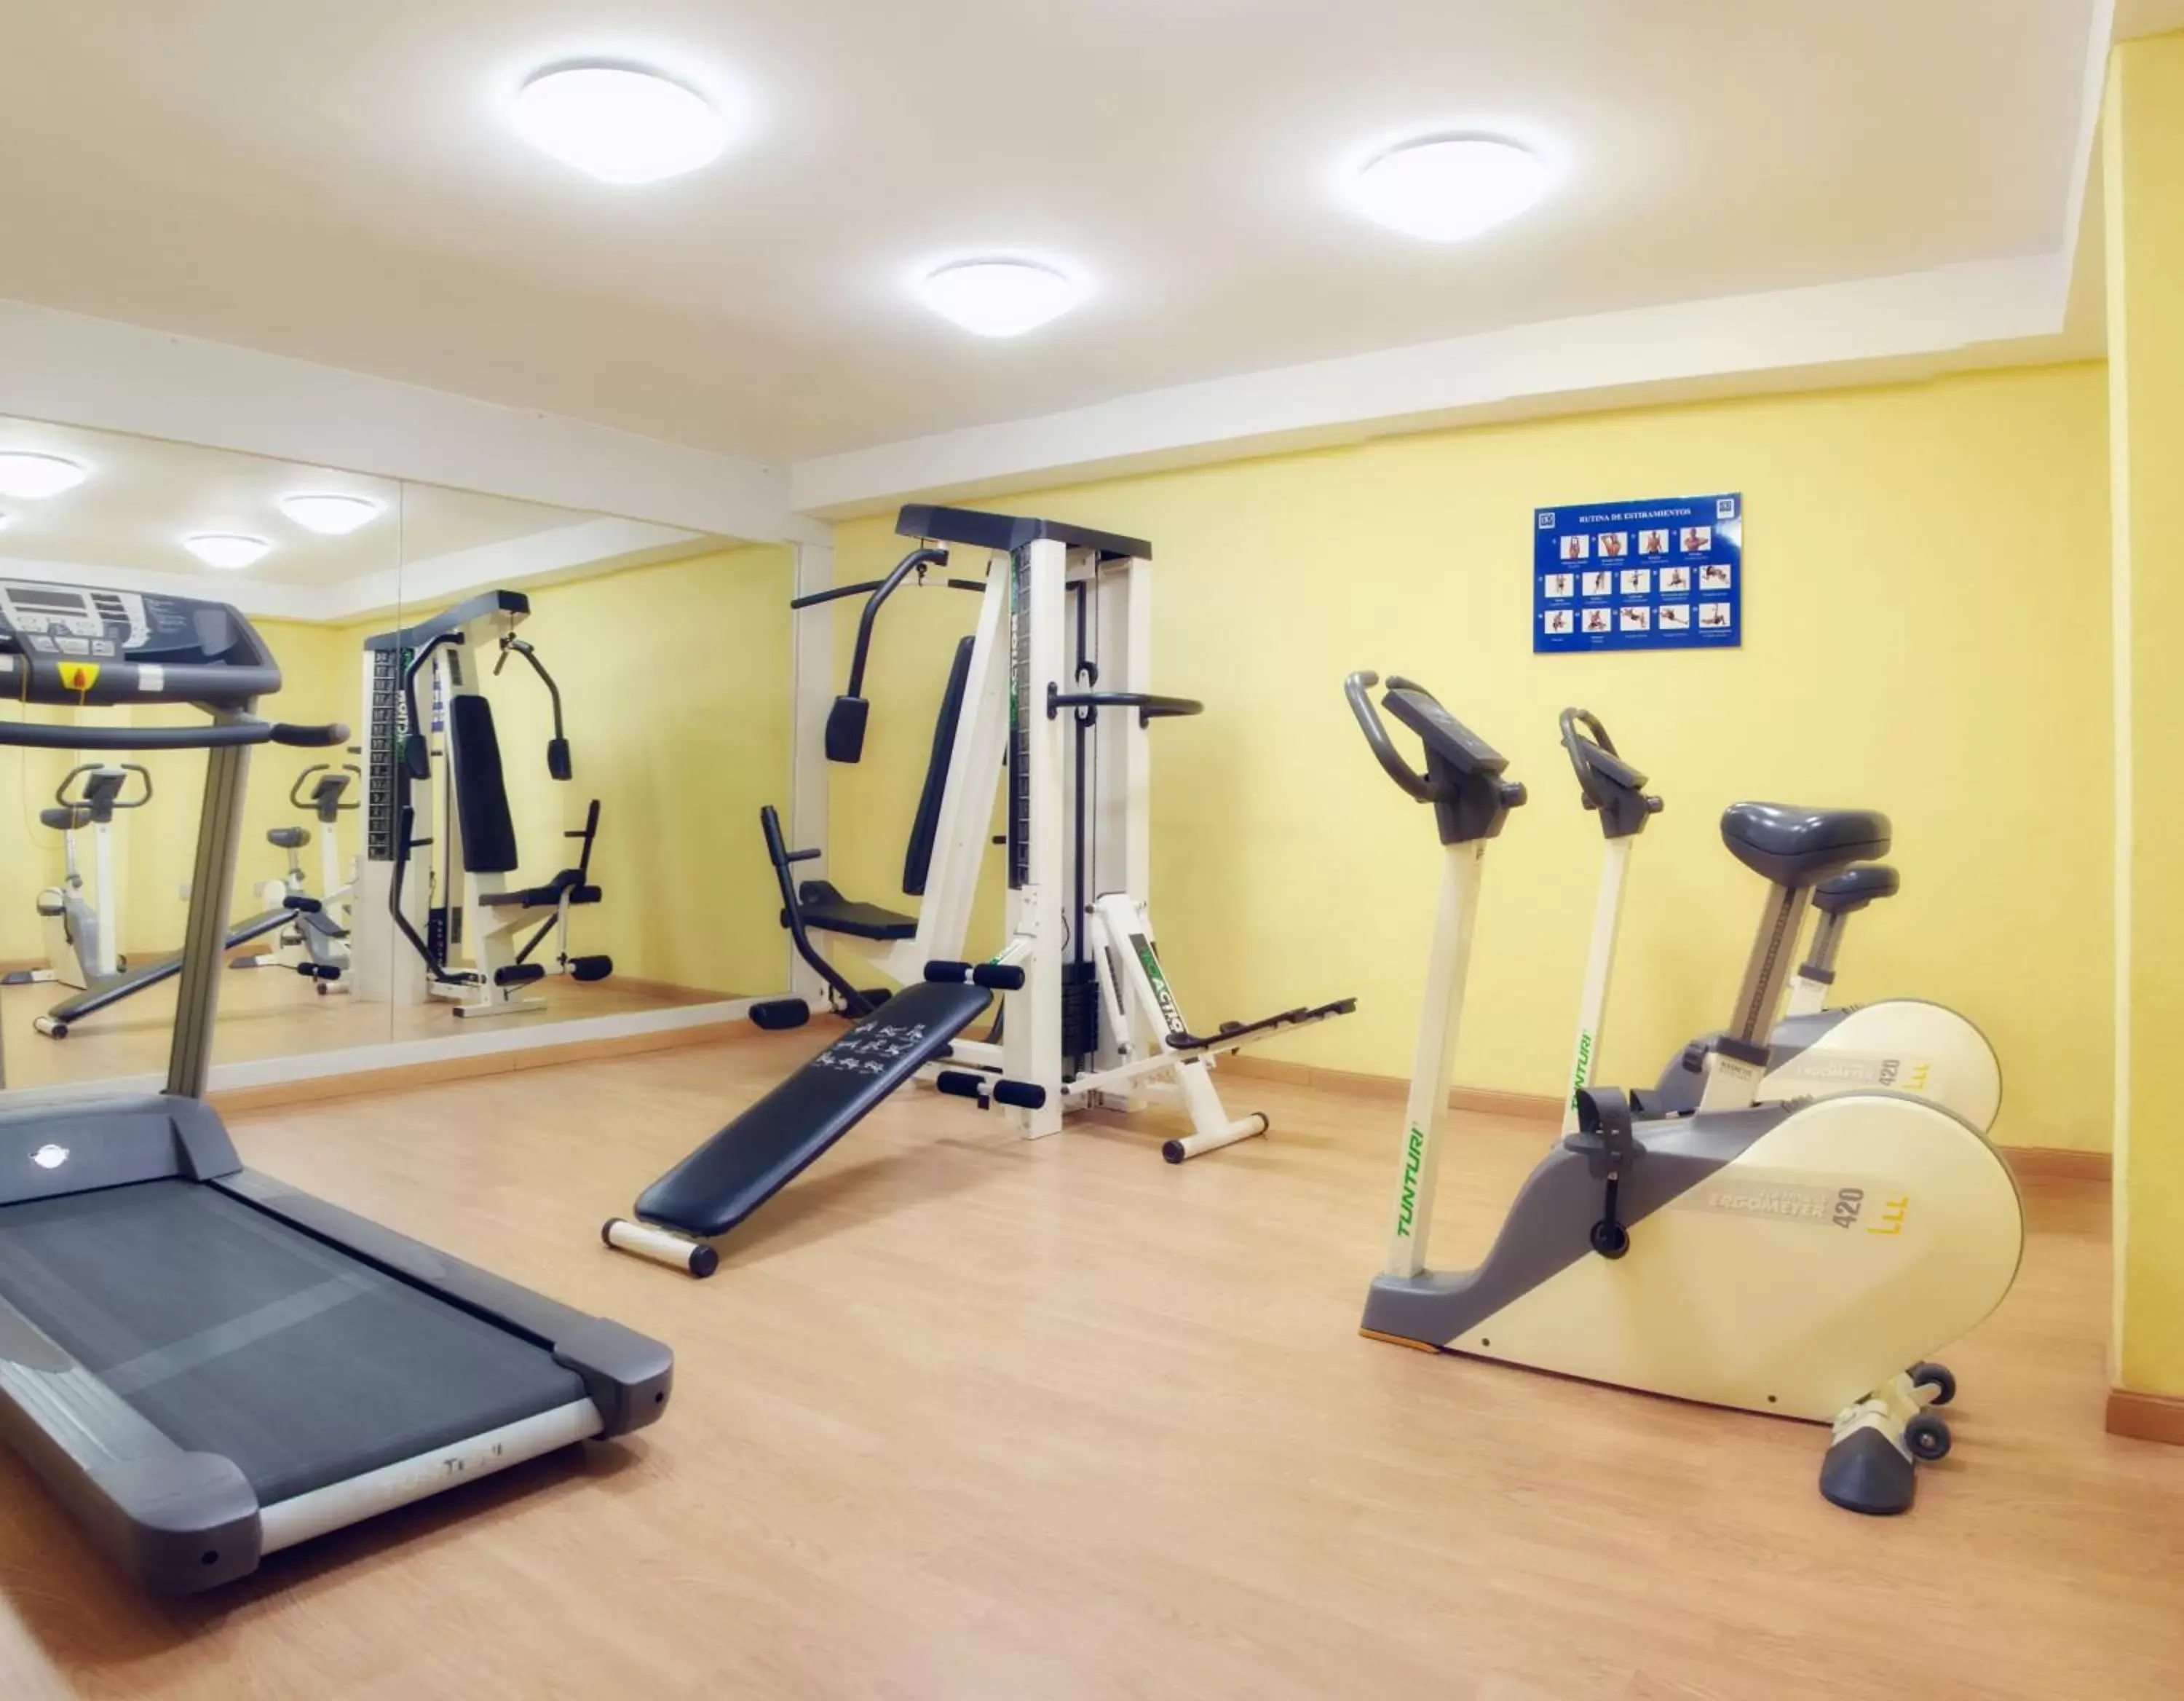 Fitness centre/facilities, Fitness Center/Facilities in Los Arcos